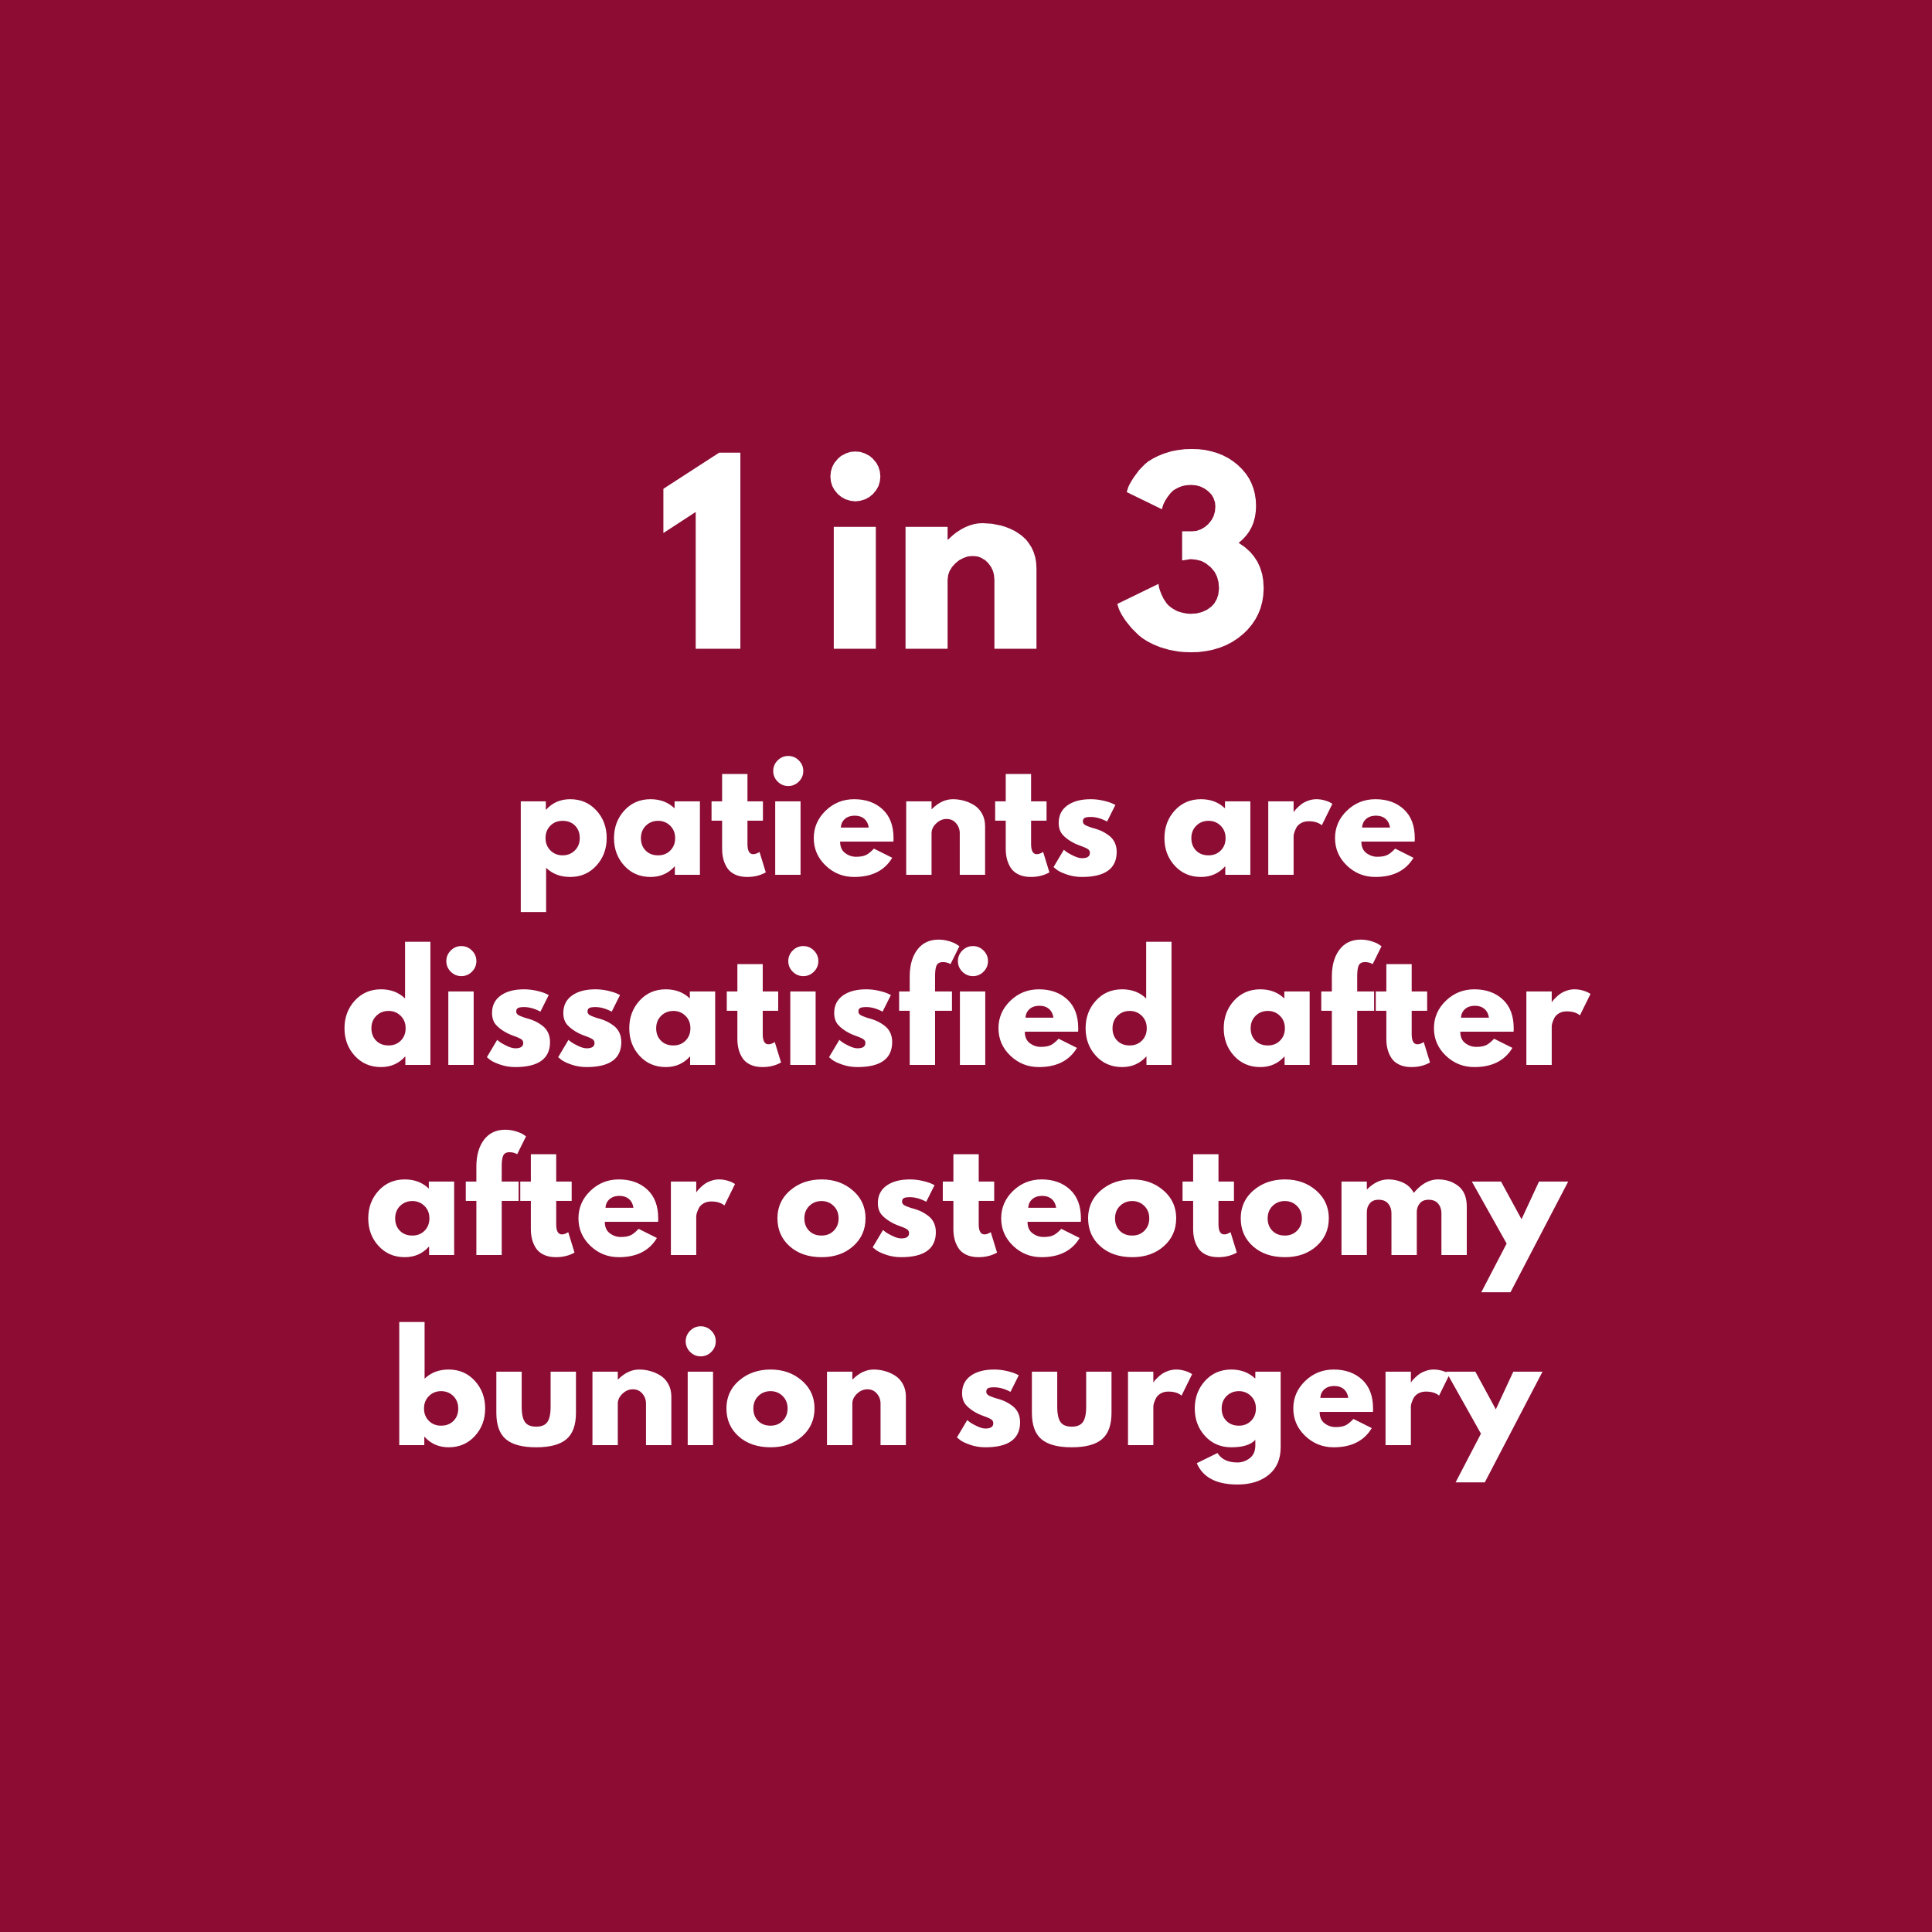 andersen-orthopedics-1-in-3-patients-dissatisfied-after-osteotomy-bunion-surgery.png